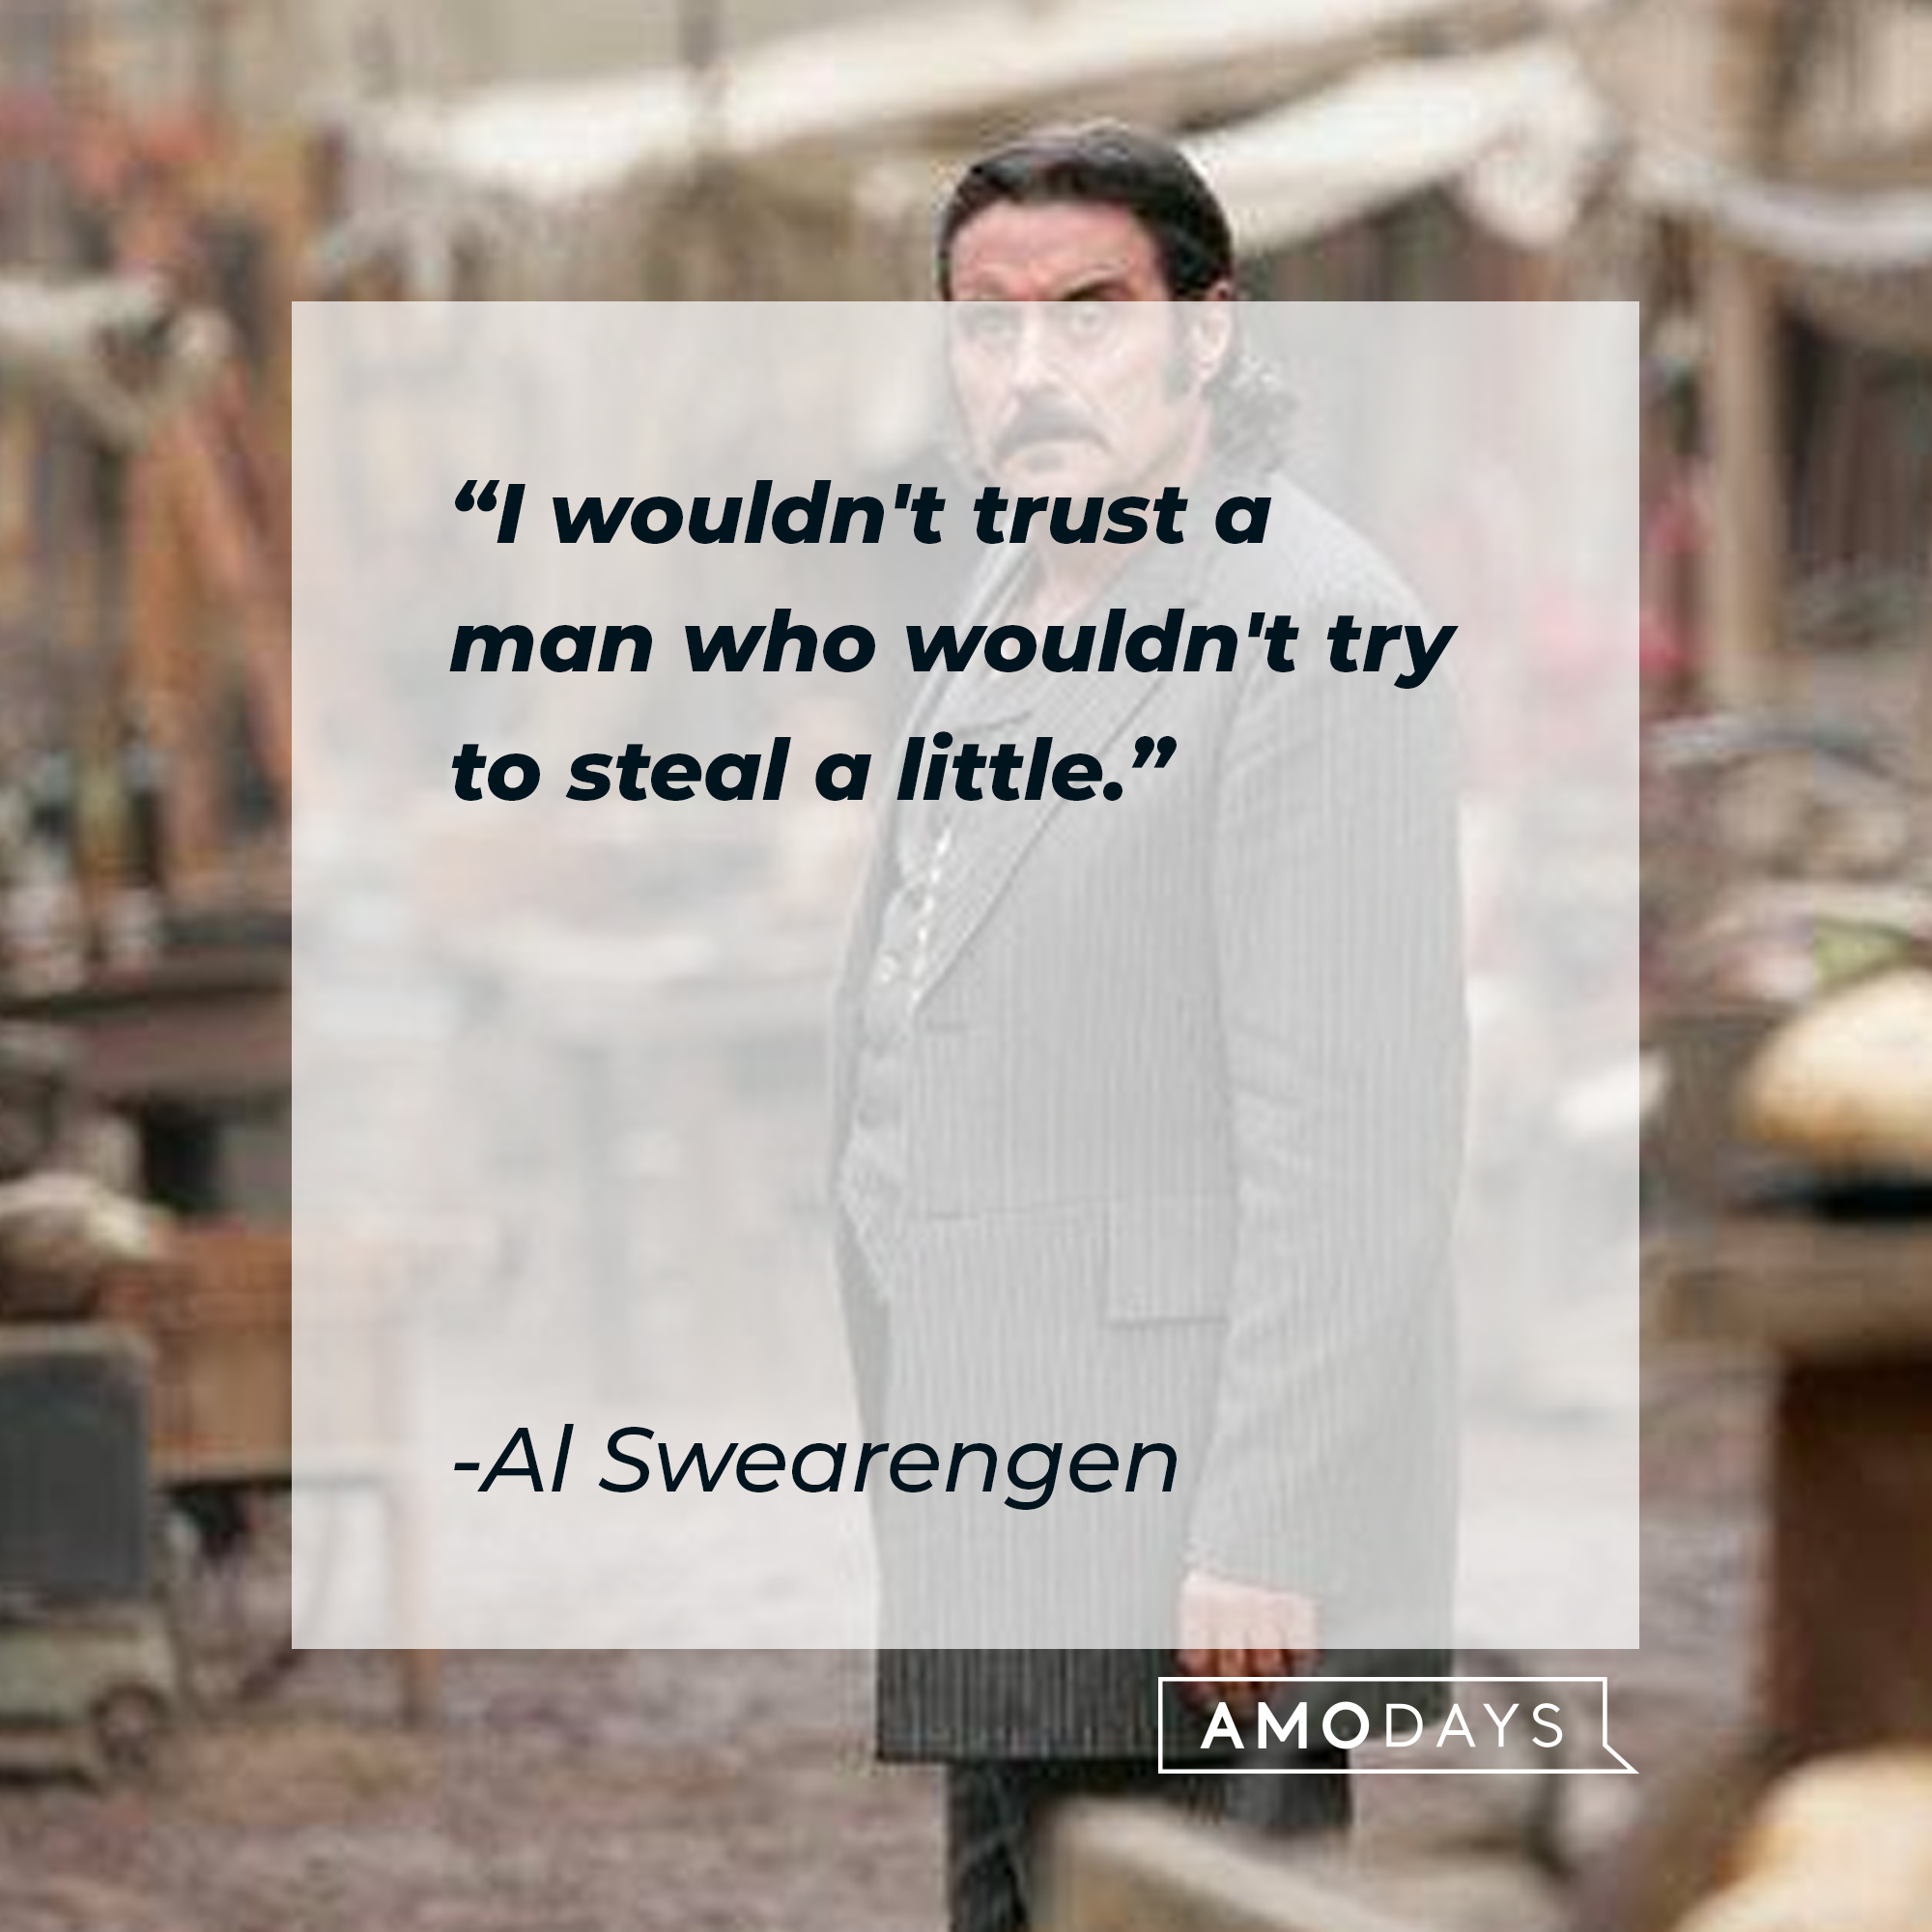 Al Swearengen with his quote, "I wouldn't trust a man who wouldn't try to steal a little." | Source: Facebook/Deadwood